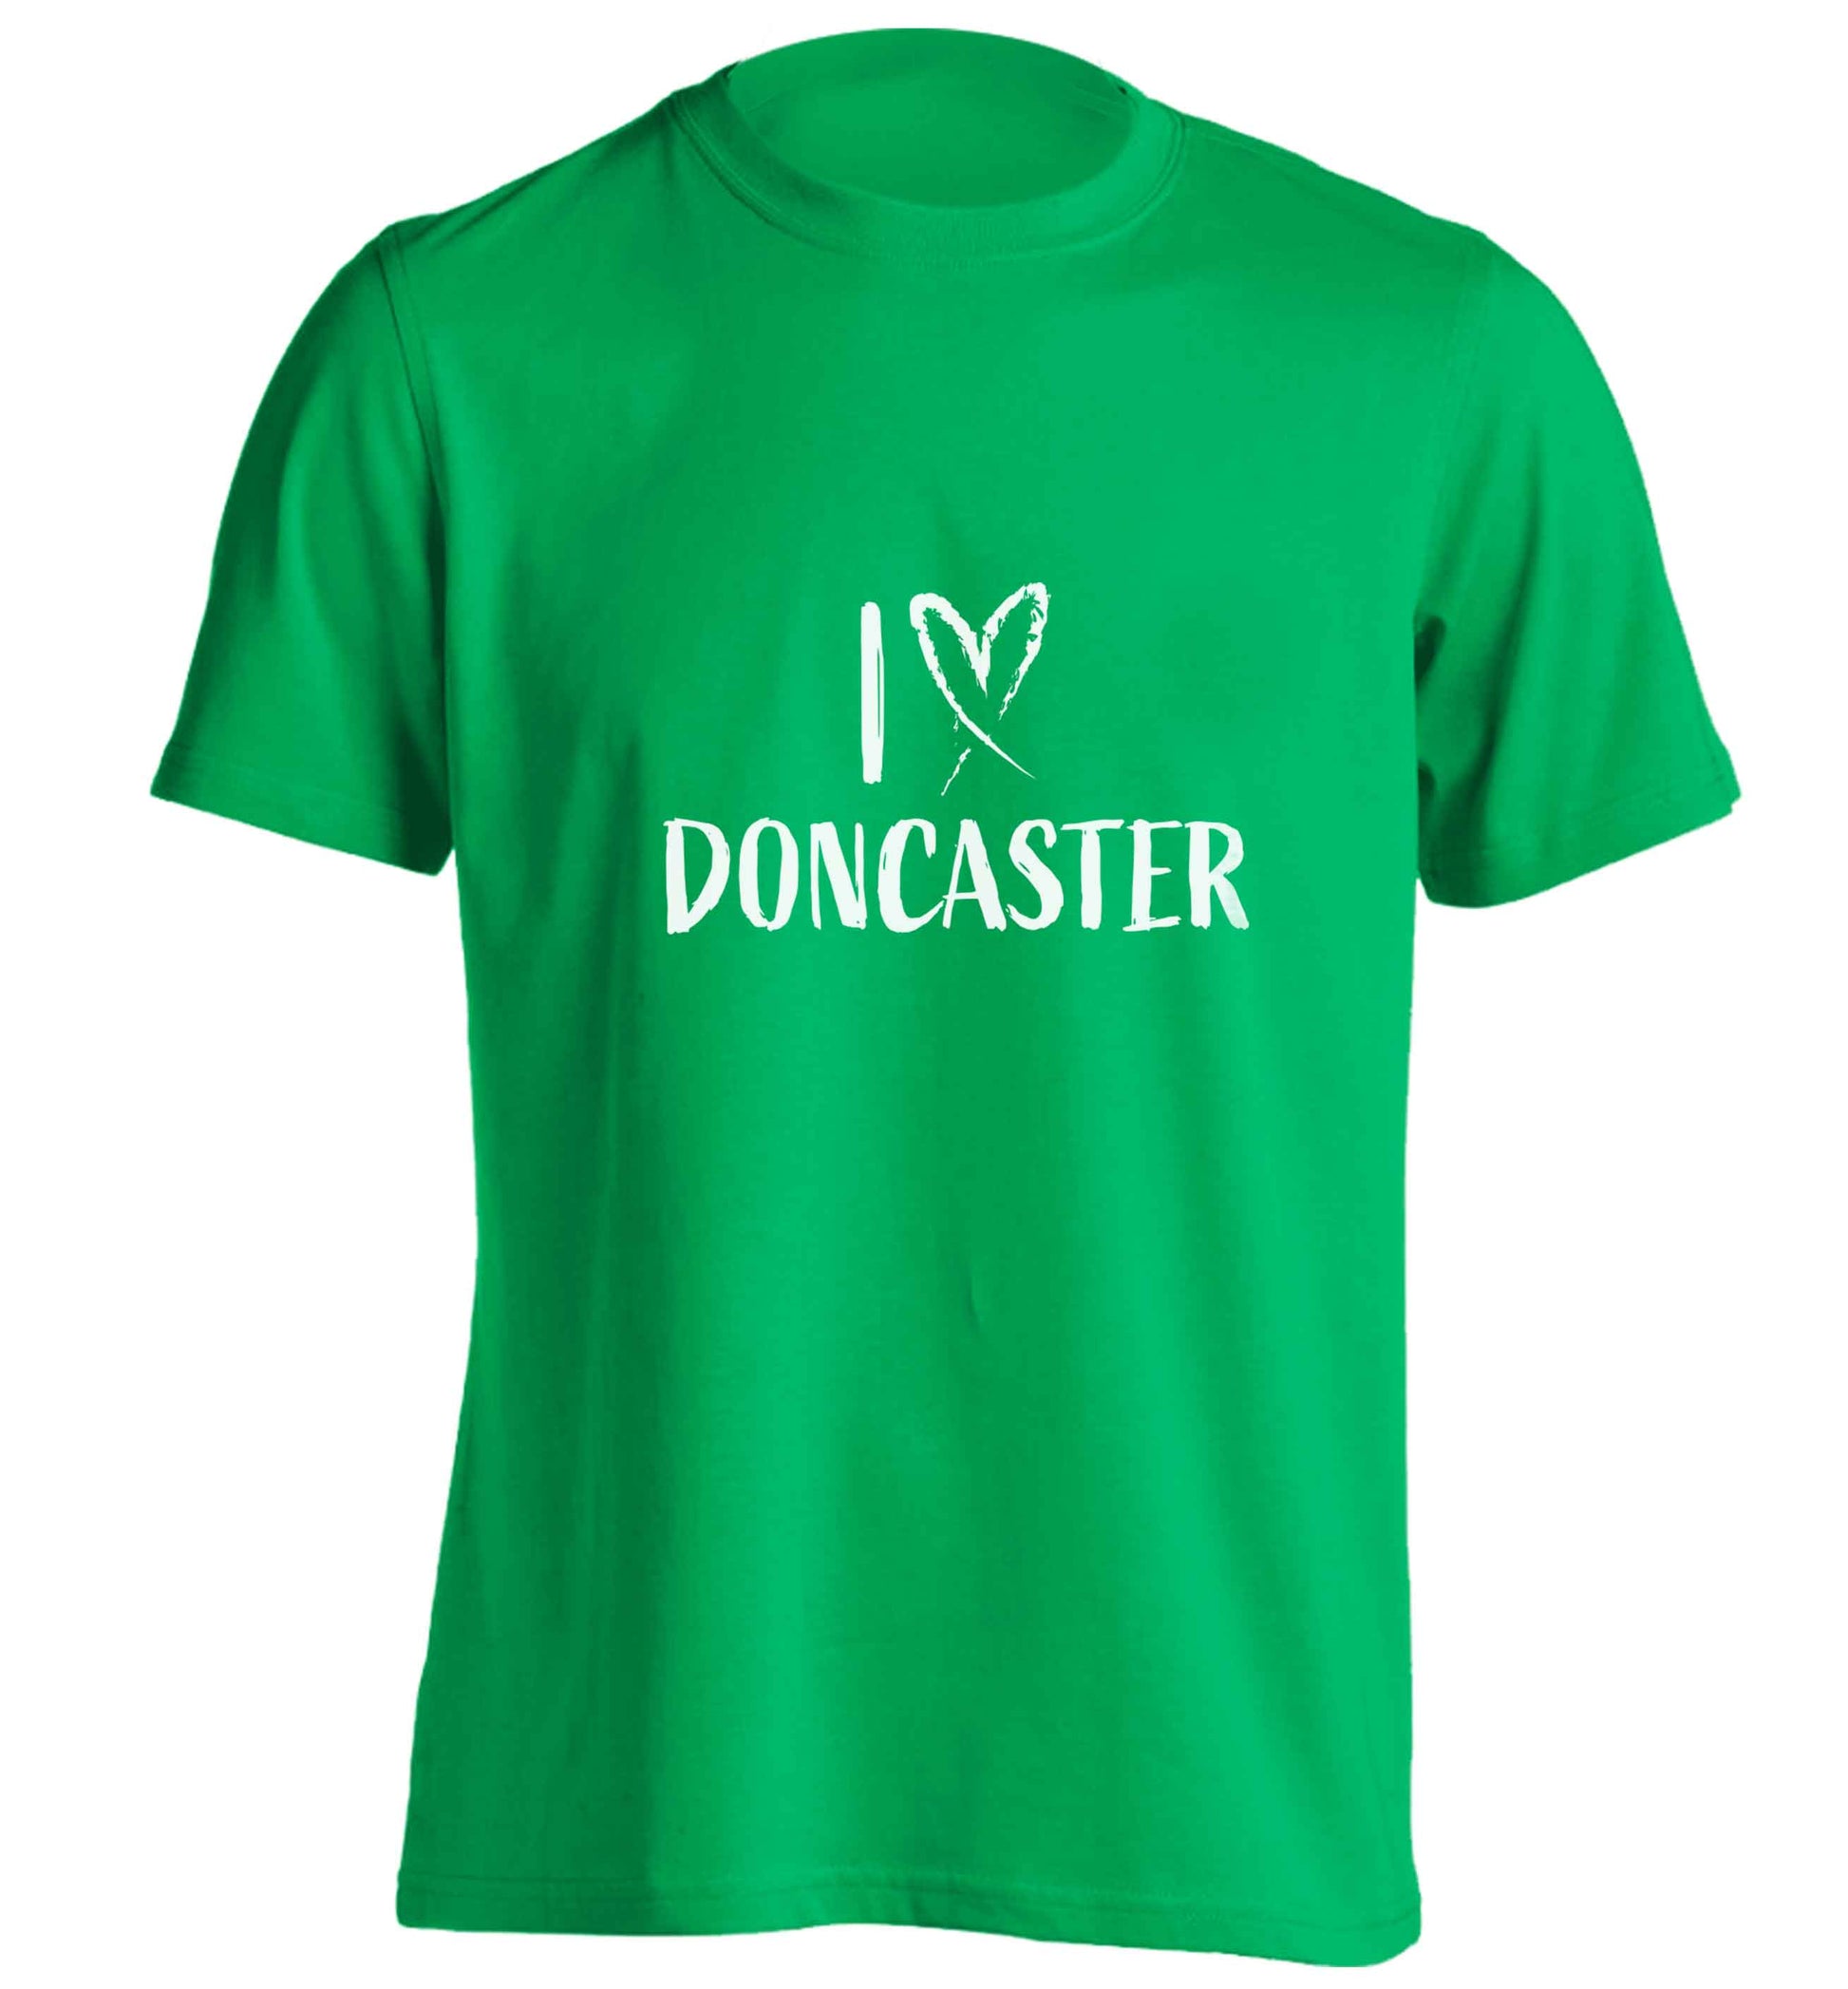 I love Doncaster adults unisex green Tshirt 2XL